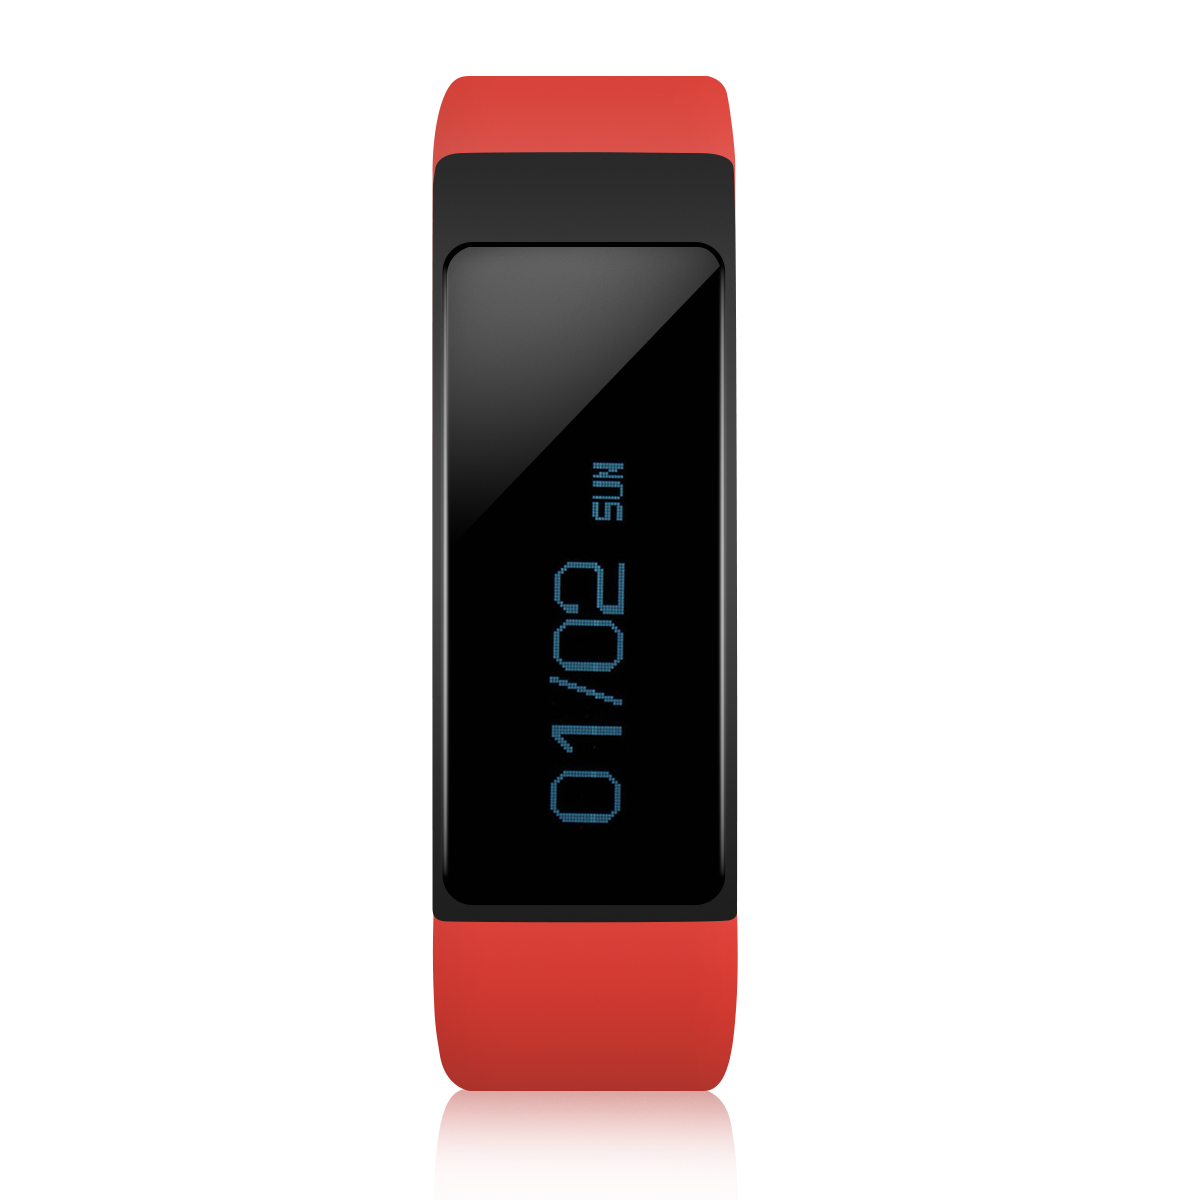 Find ELEGIANT I5 Plus 0.91 inch OLED Screen Sleep Monitor Message Reminder IP68 Waterproof Smart Wristband for Sale on Gipsybee.com with cryptocurrencies